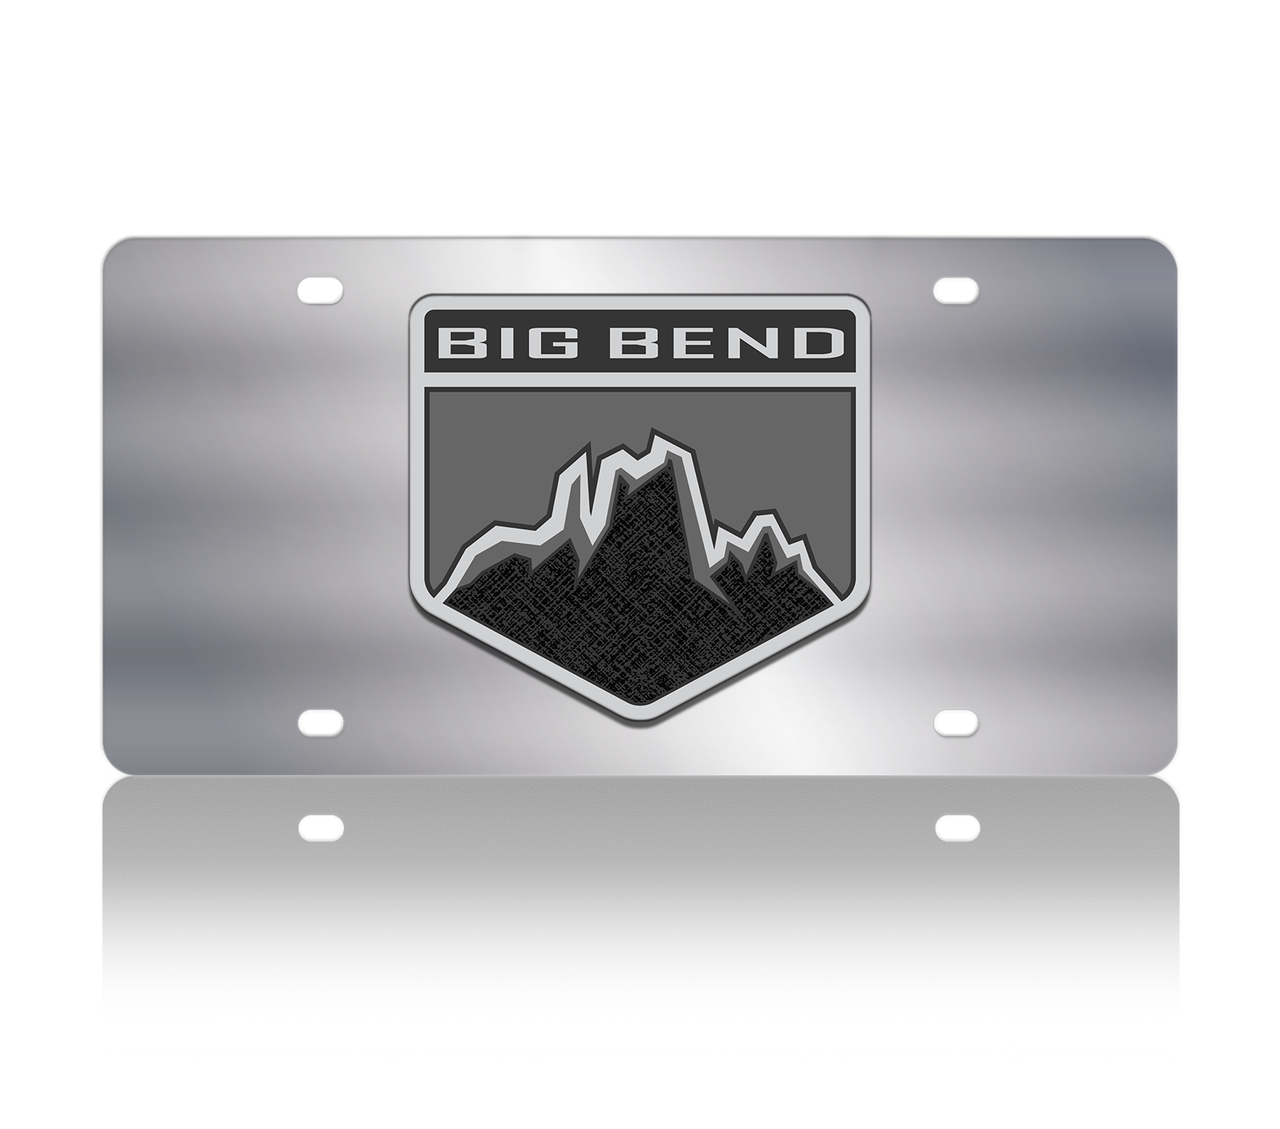 Ford Bronco Big Bend Stainless Steel License Plate